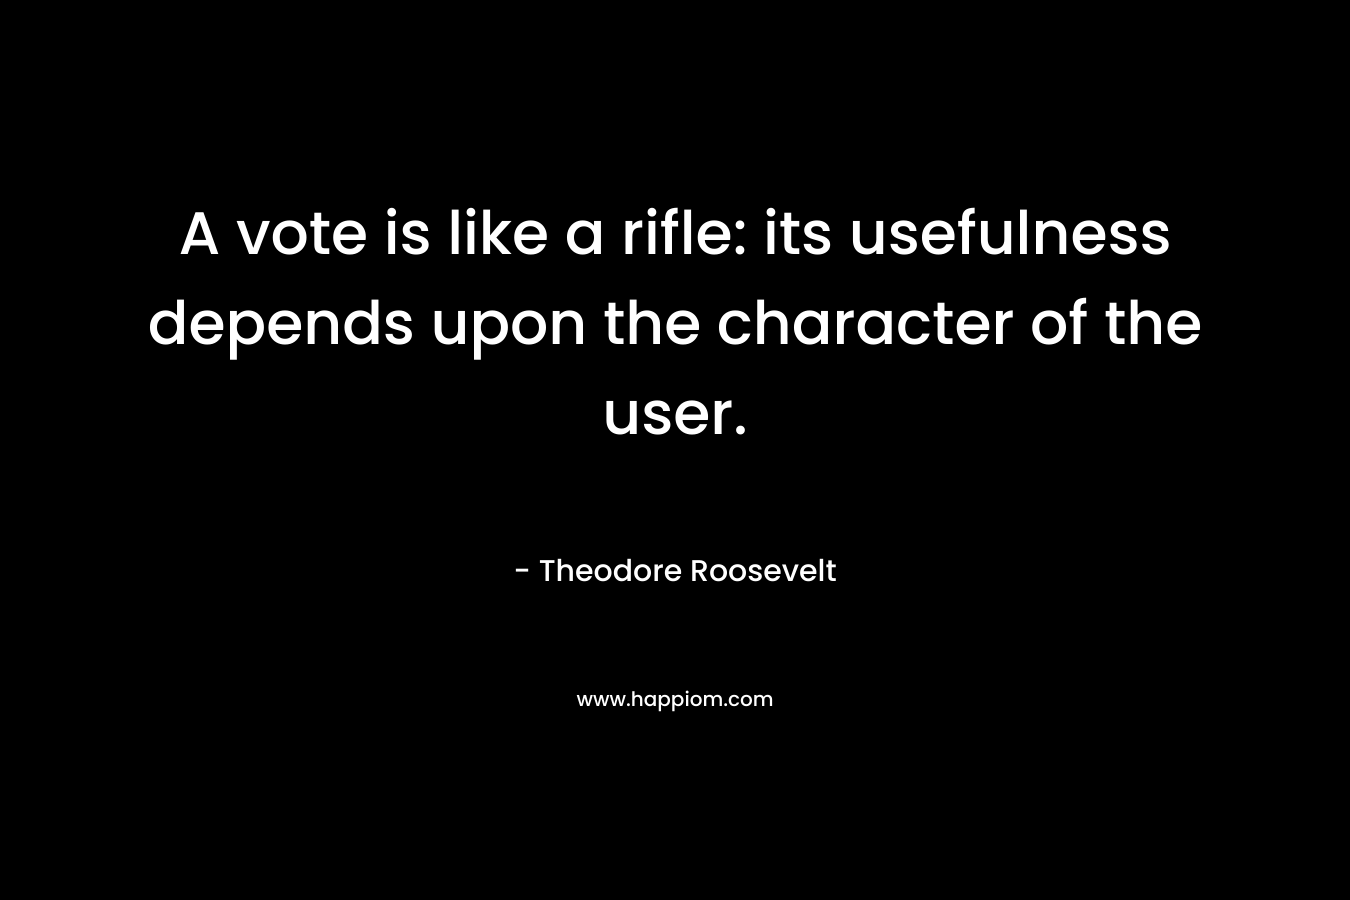 A vote is like a rifle: its usefulness depends upon the character of the user. – Theodore Roosevelt